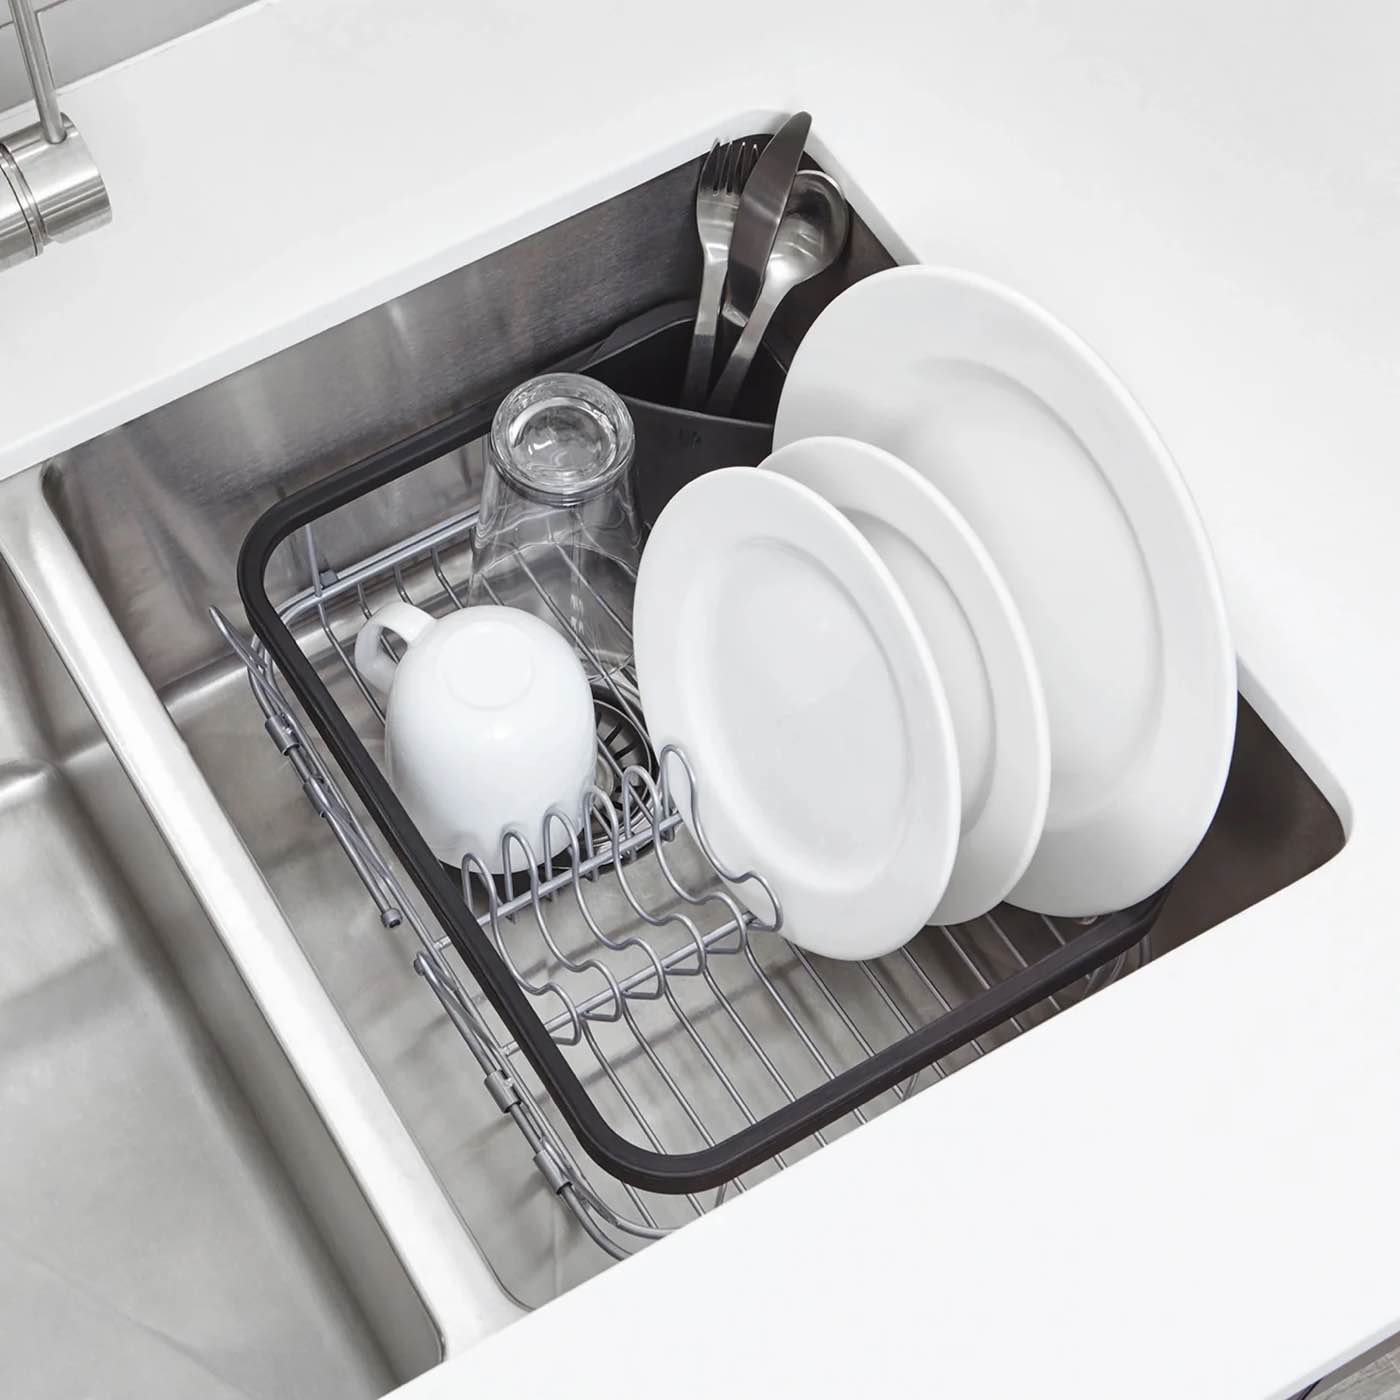 umbra-sinkin-expandable-dish-drying-rack-in-sink